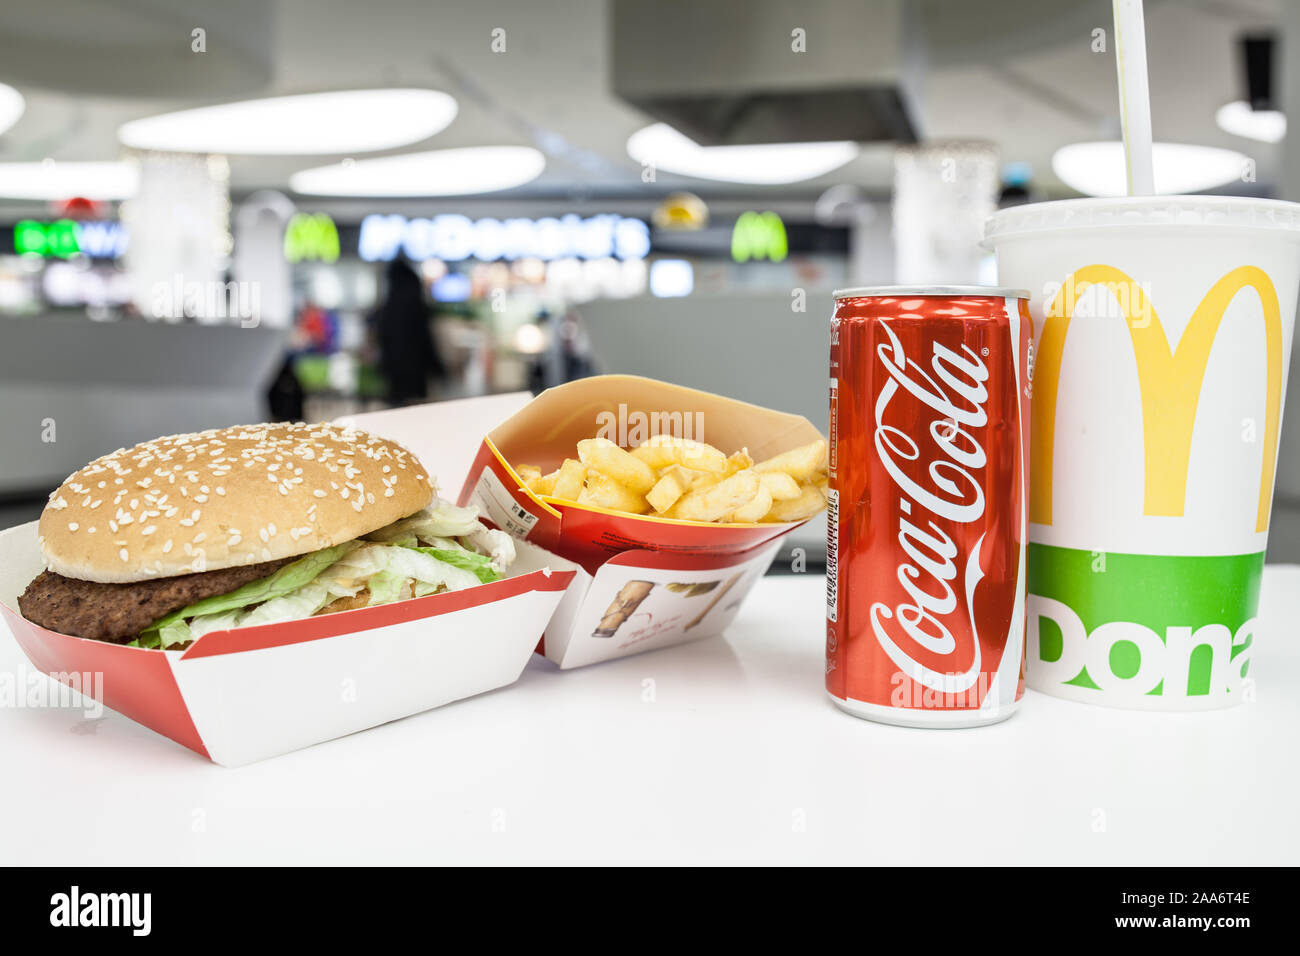 McDonald's Big Mac 100% pure beef sandwiched with refreshing Coca-Cola Coke, big yellow McDonald's M sign, logo on cup, French fries Stock Photo